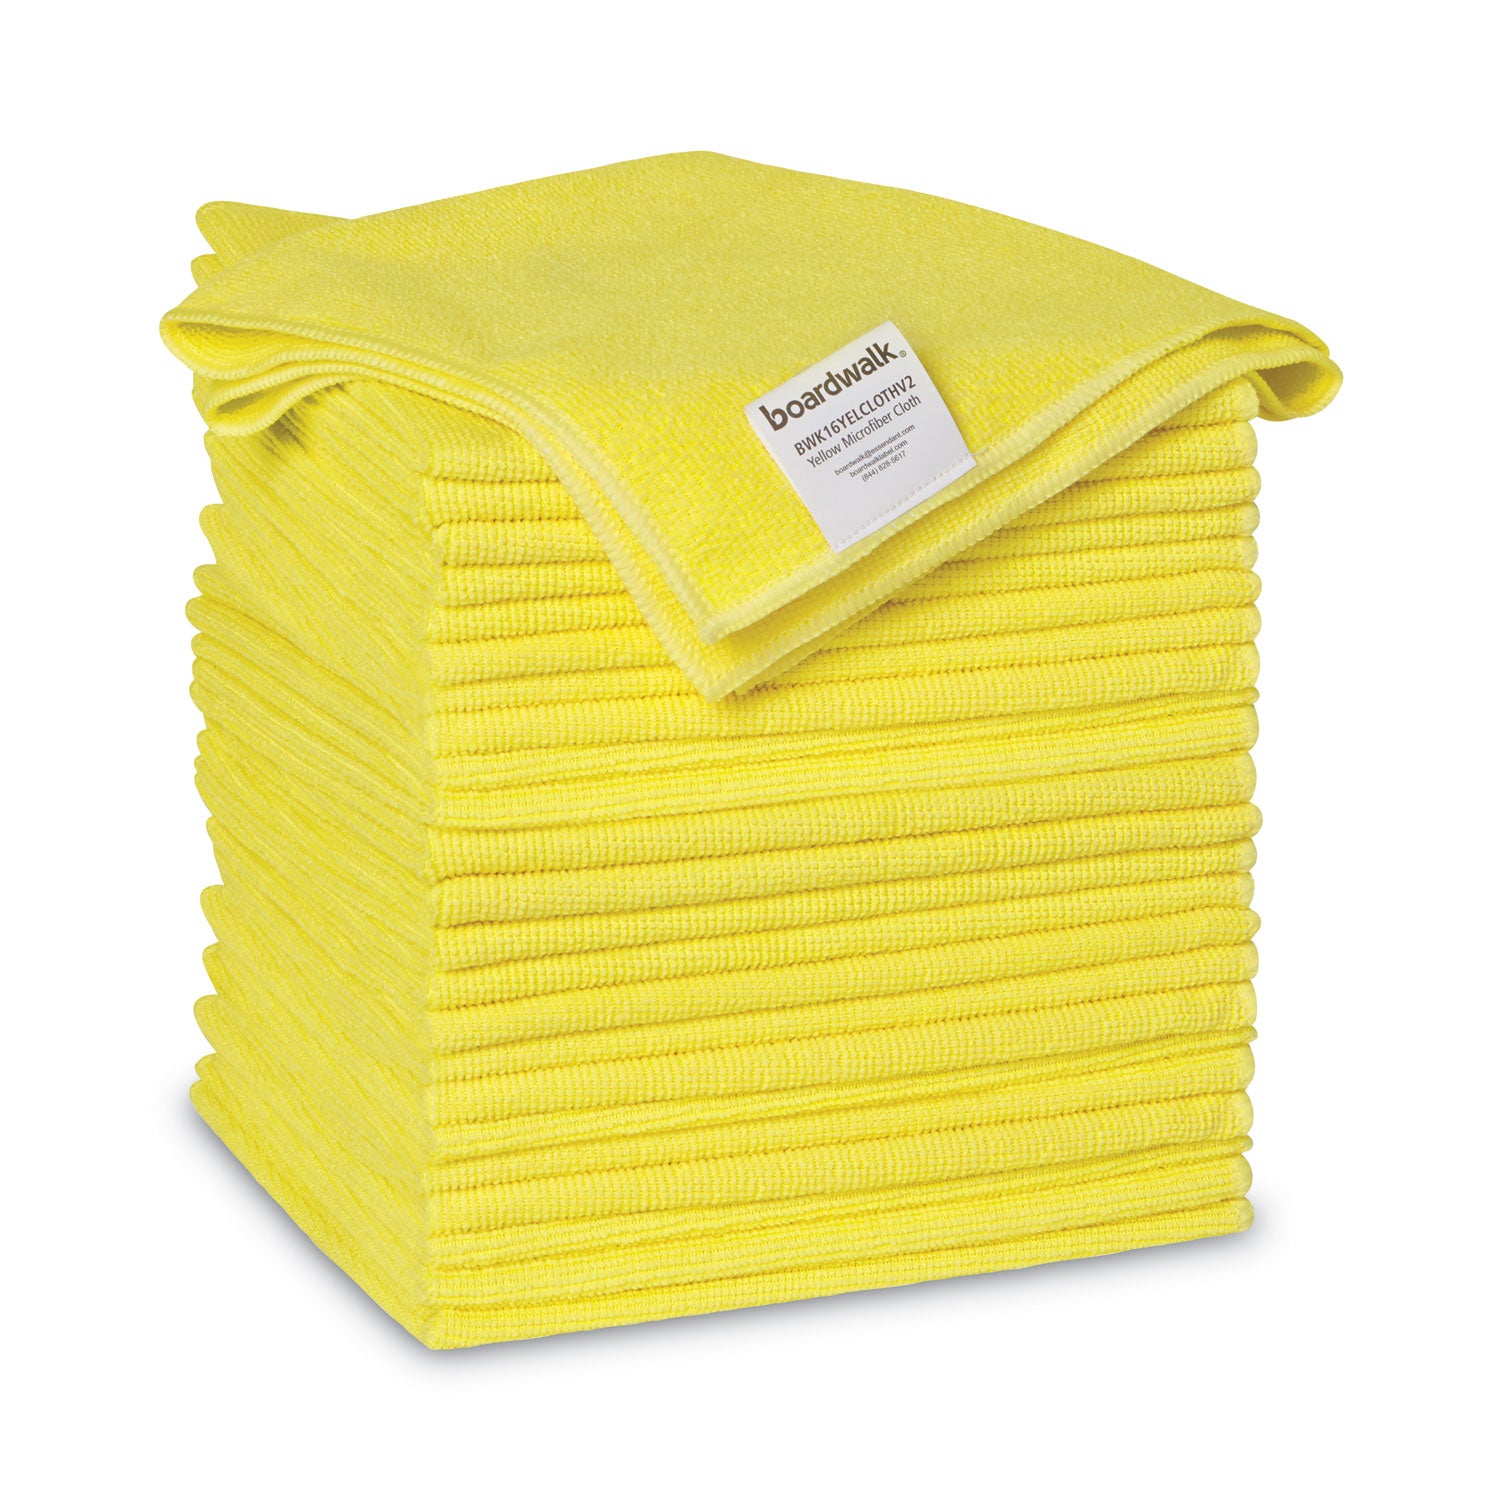 microfiber-cleaning-cloths-16-x-16-yellow-24-pack_bwk16yelclothv2 - 1